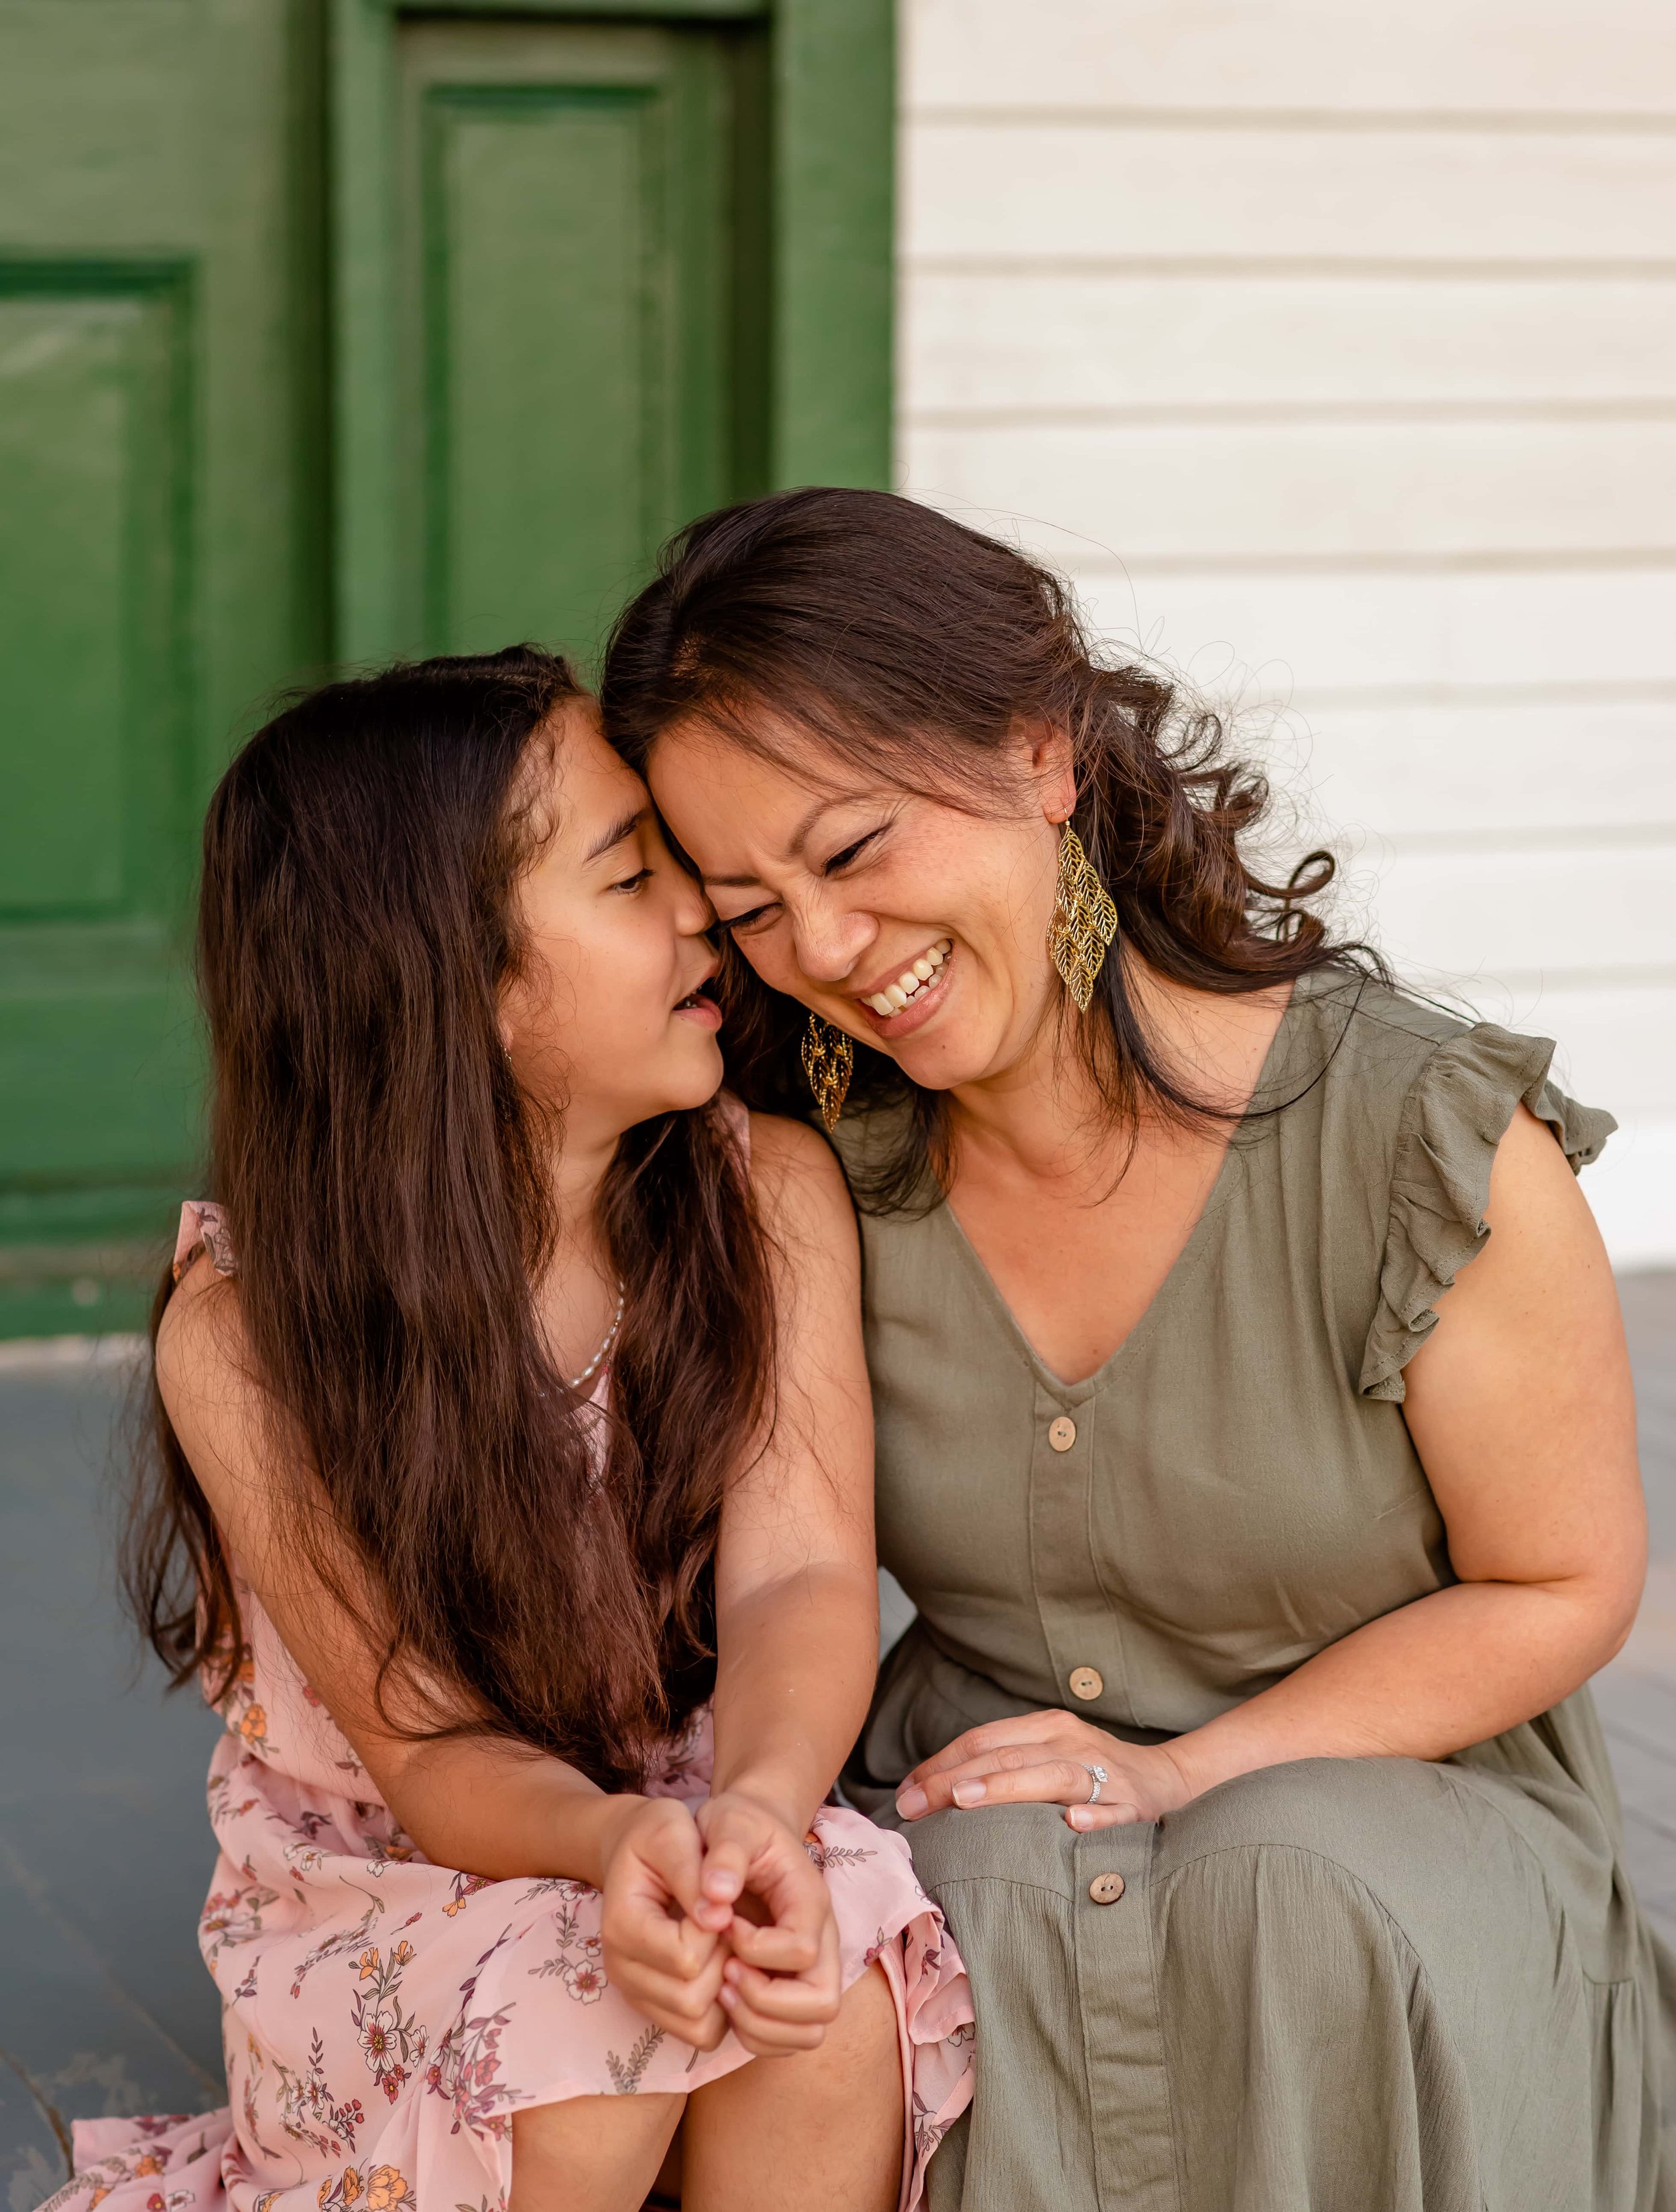 Maryland family portrait of whispering daughter and laughing mom